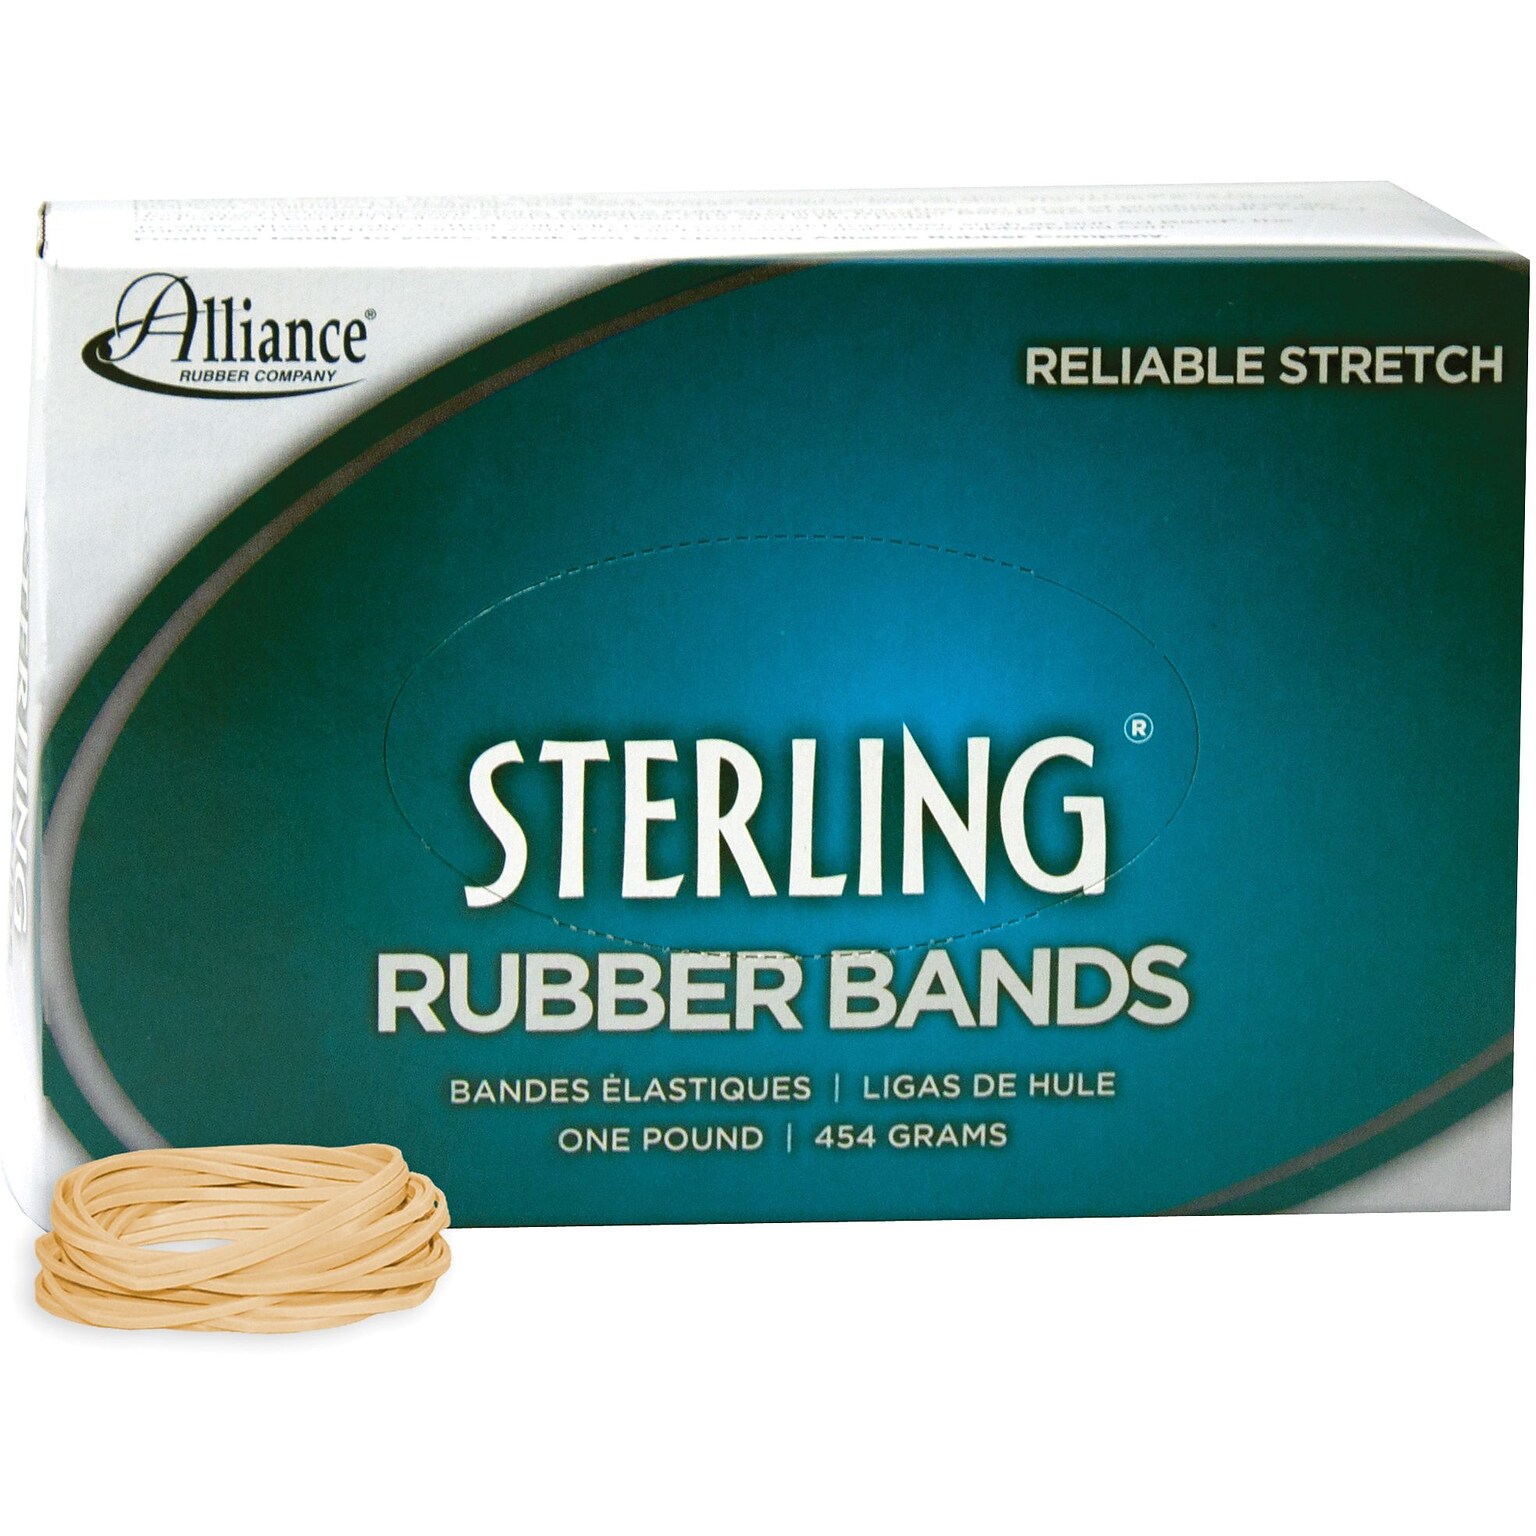 Rubber Band, Sterling , Meets Fed Spec, Soft Stretch, Easy Apply, Excellent Count, USA MADE, #14 (2 x 1/16), 1 lb Box